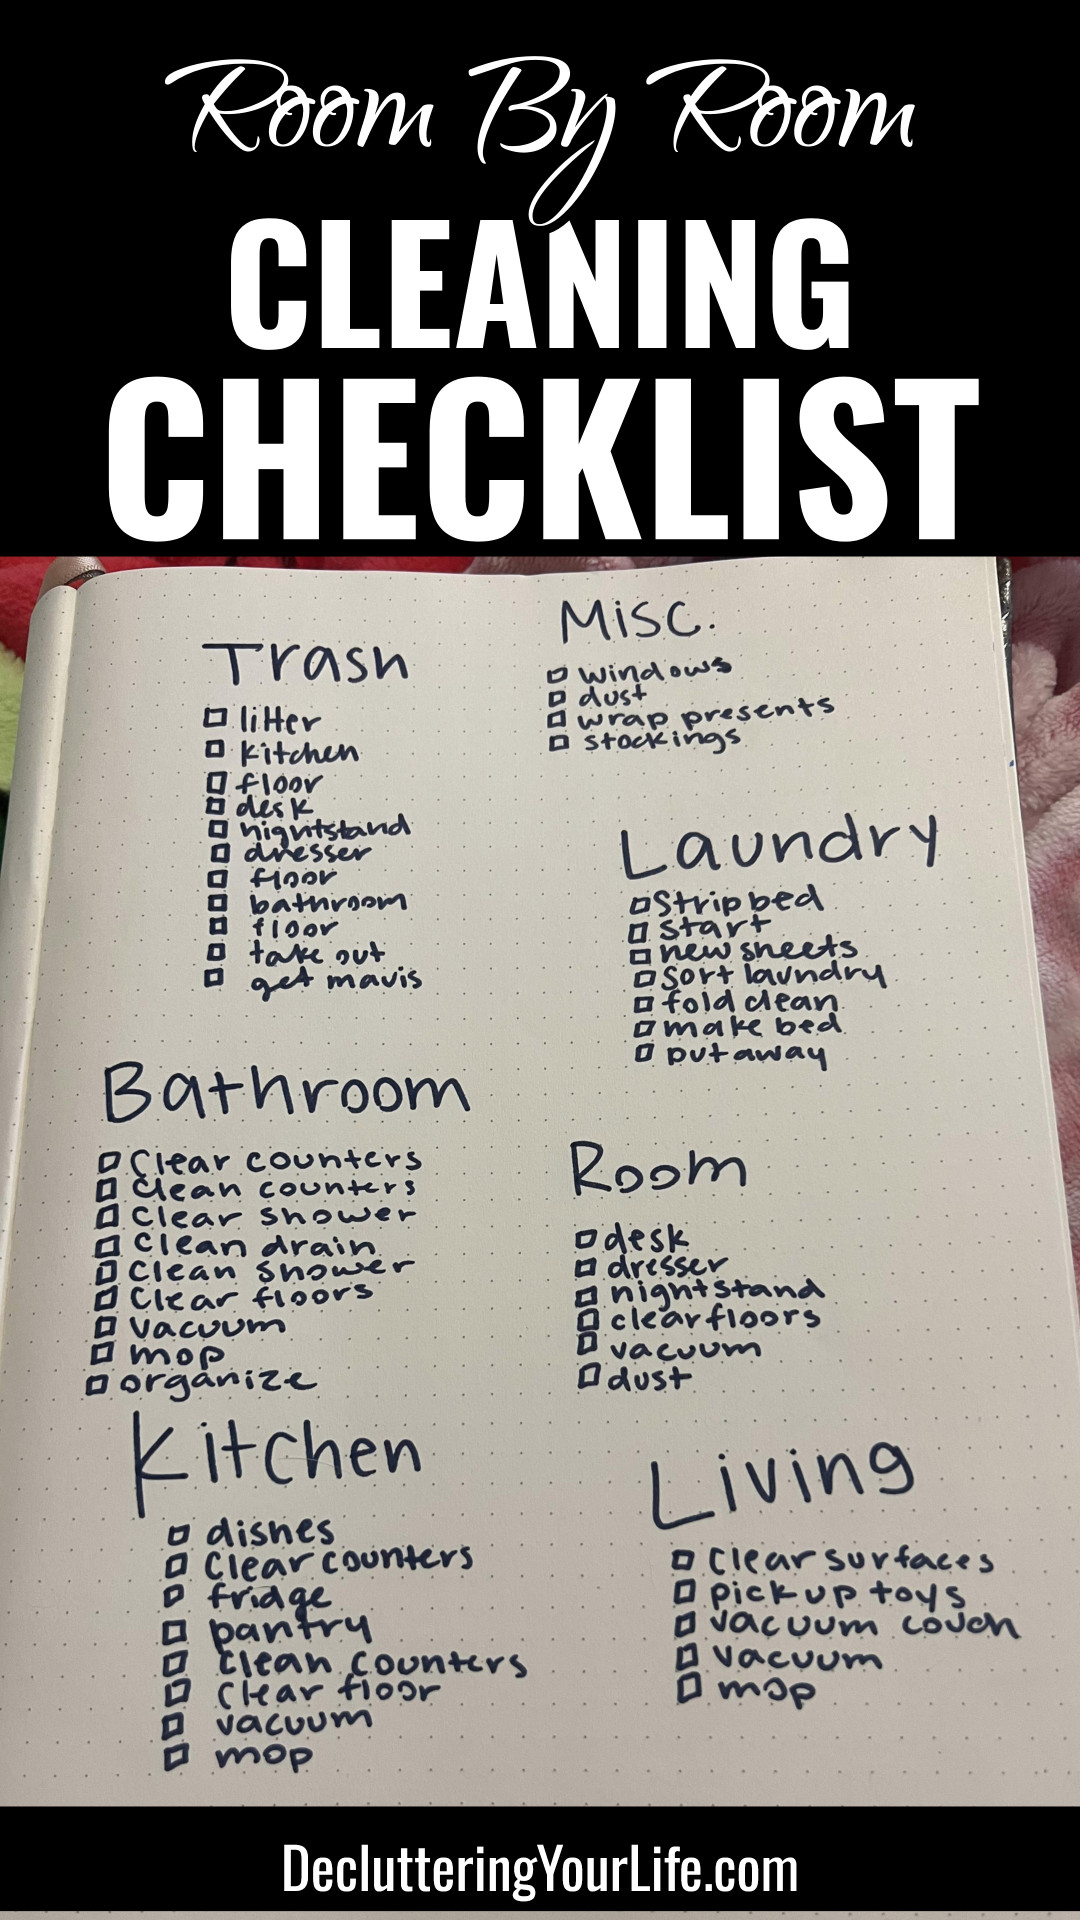 Room by room cleaning checklist